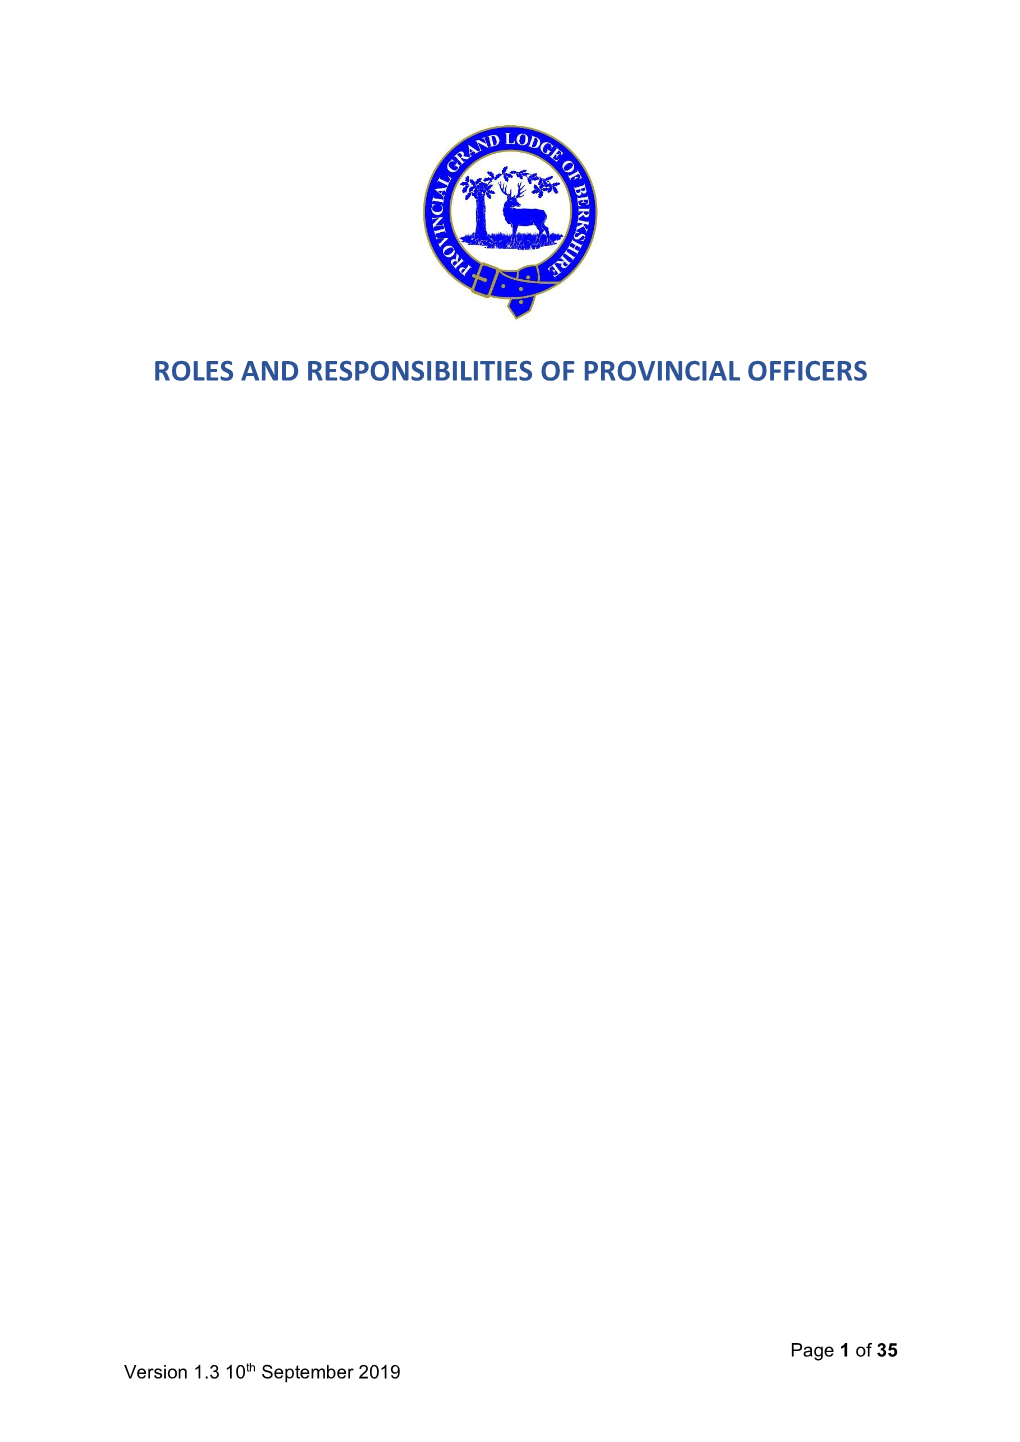 Roles and Responsibilities of Provincial Officers